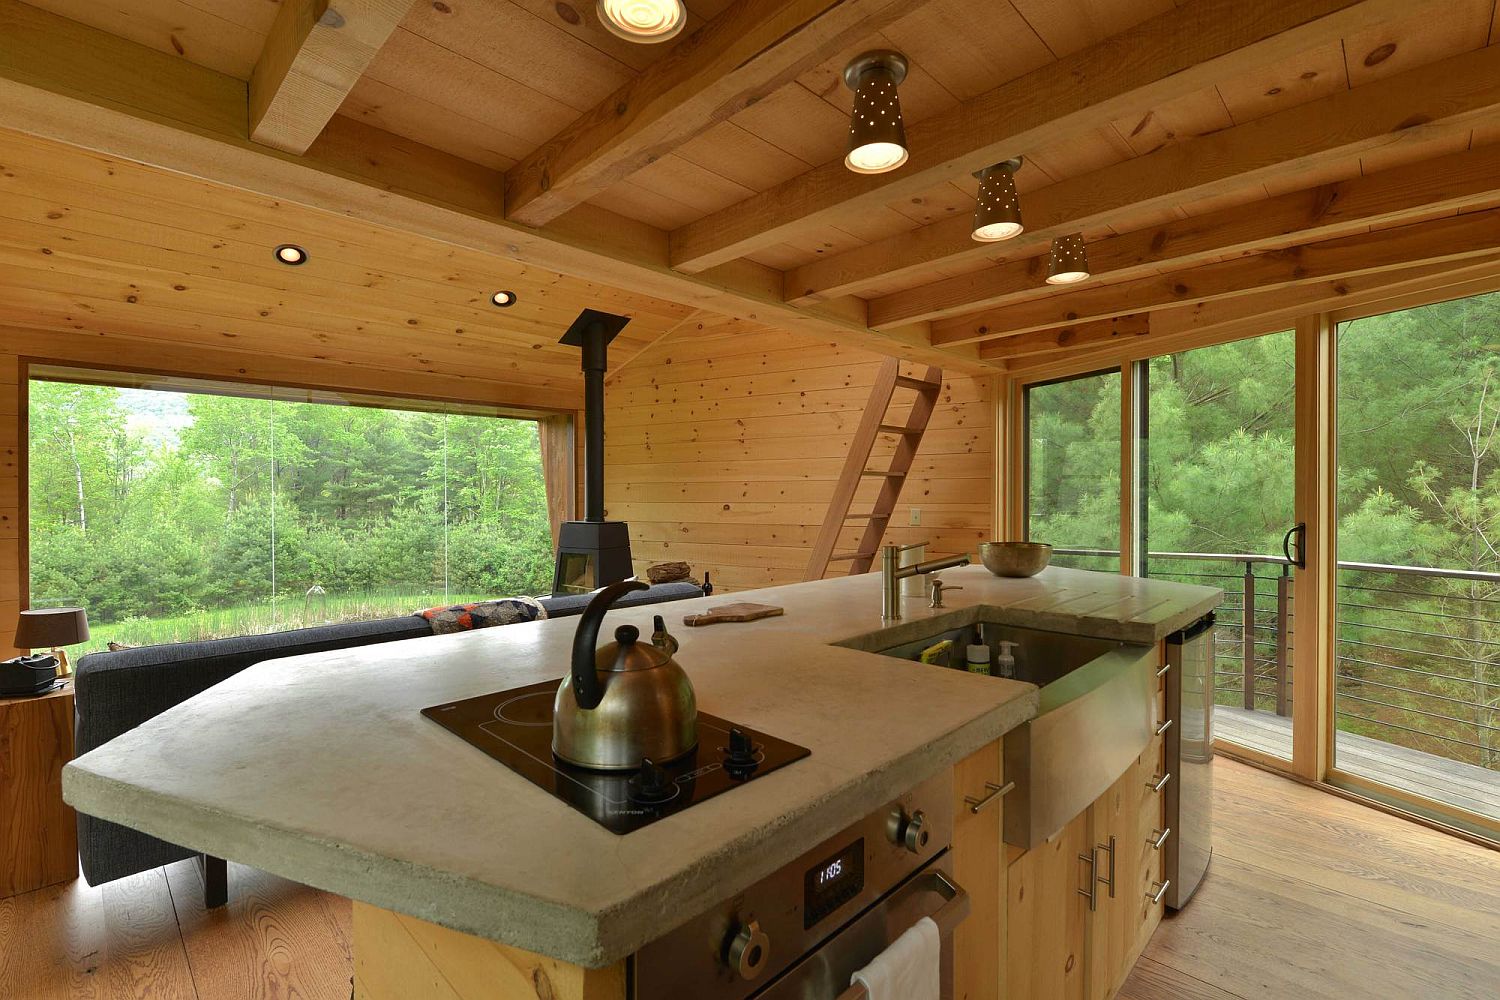 Kitchen-and-lounge-area-of-the-treehouse